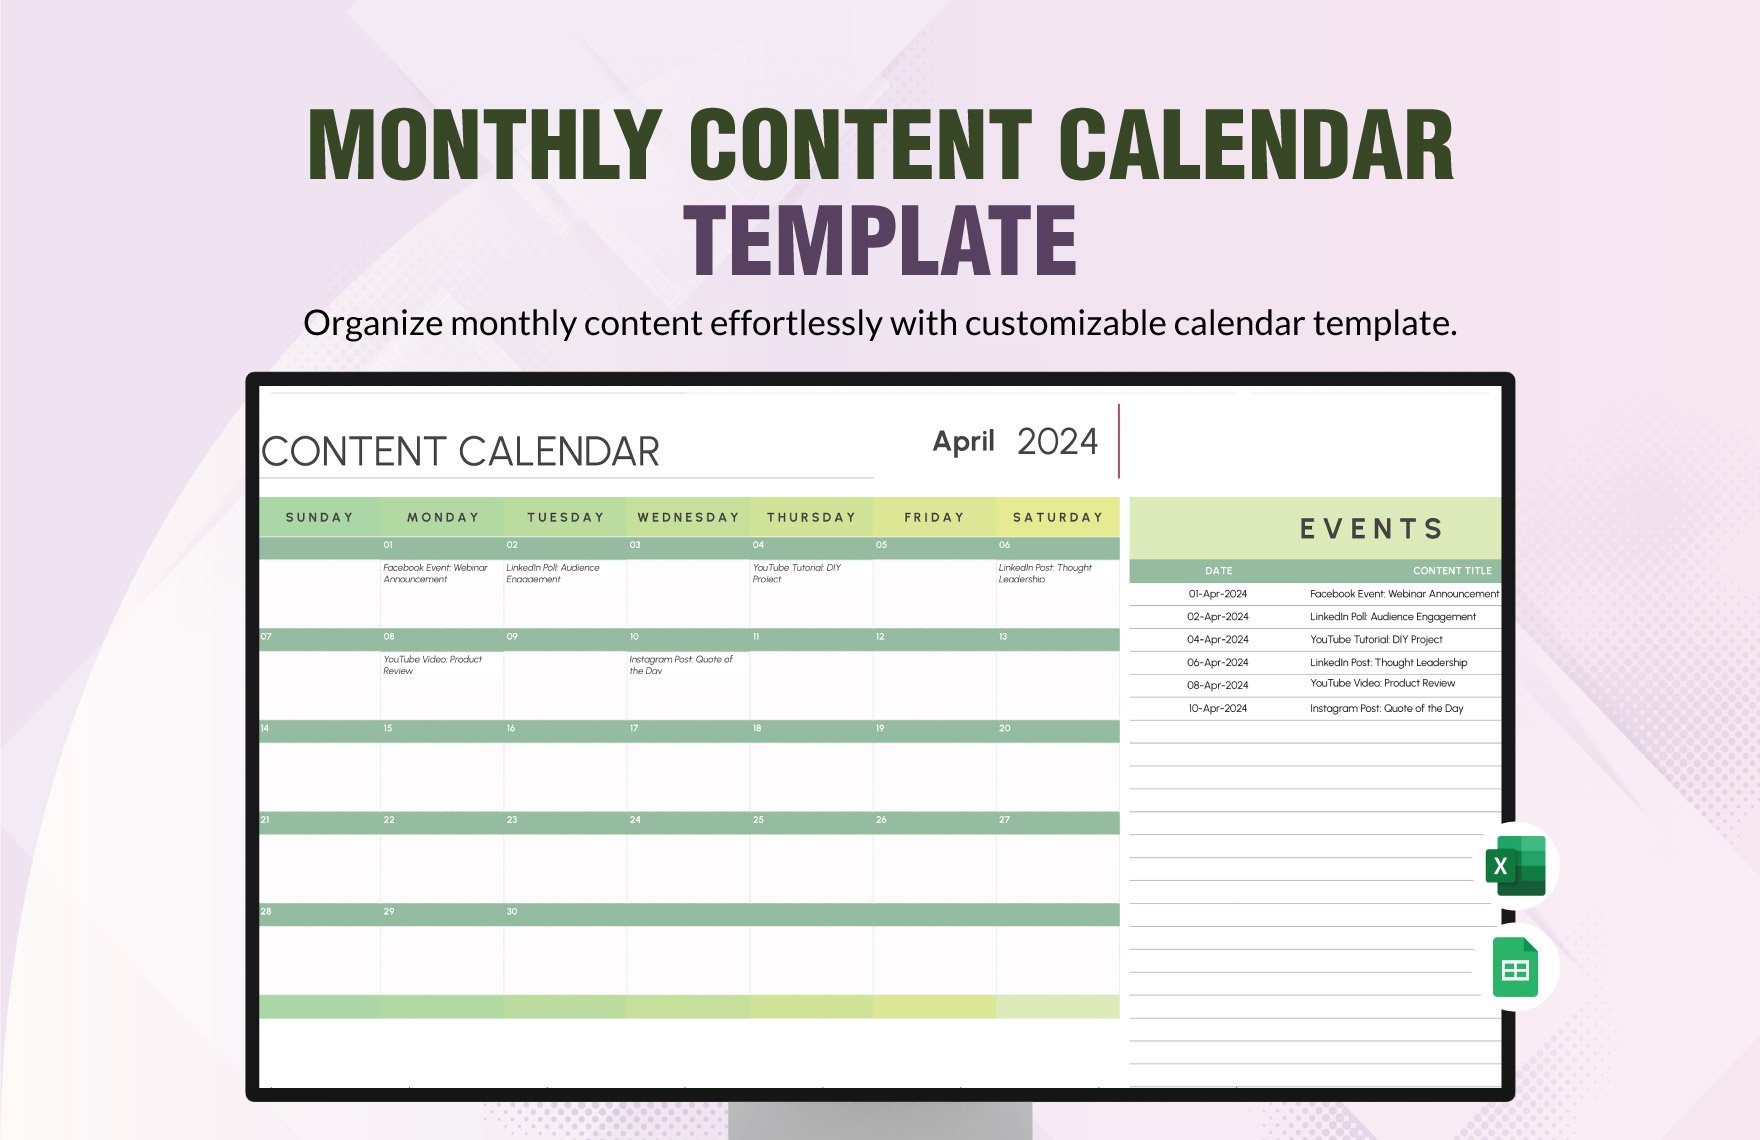 Monthly Content Calendar Template in Excel, Google Sheets